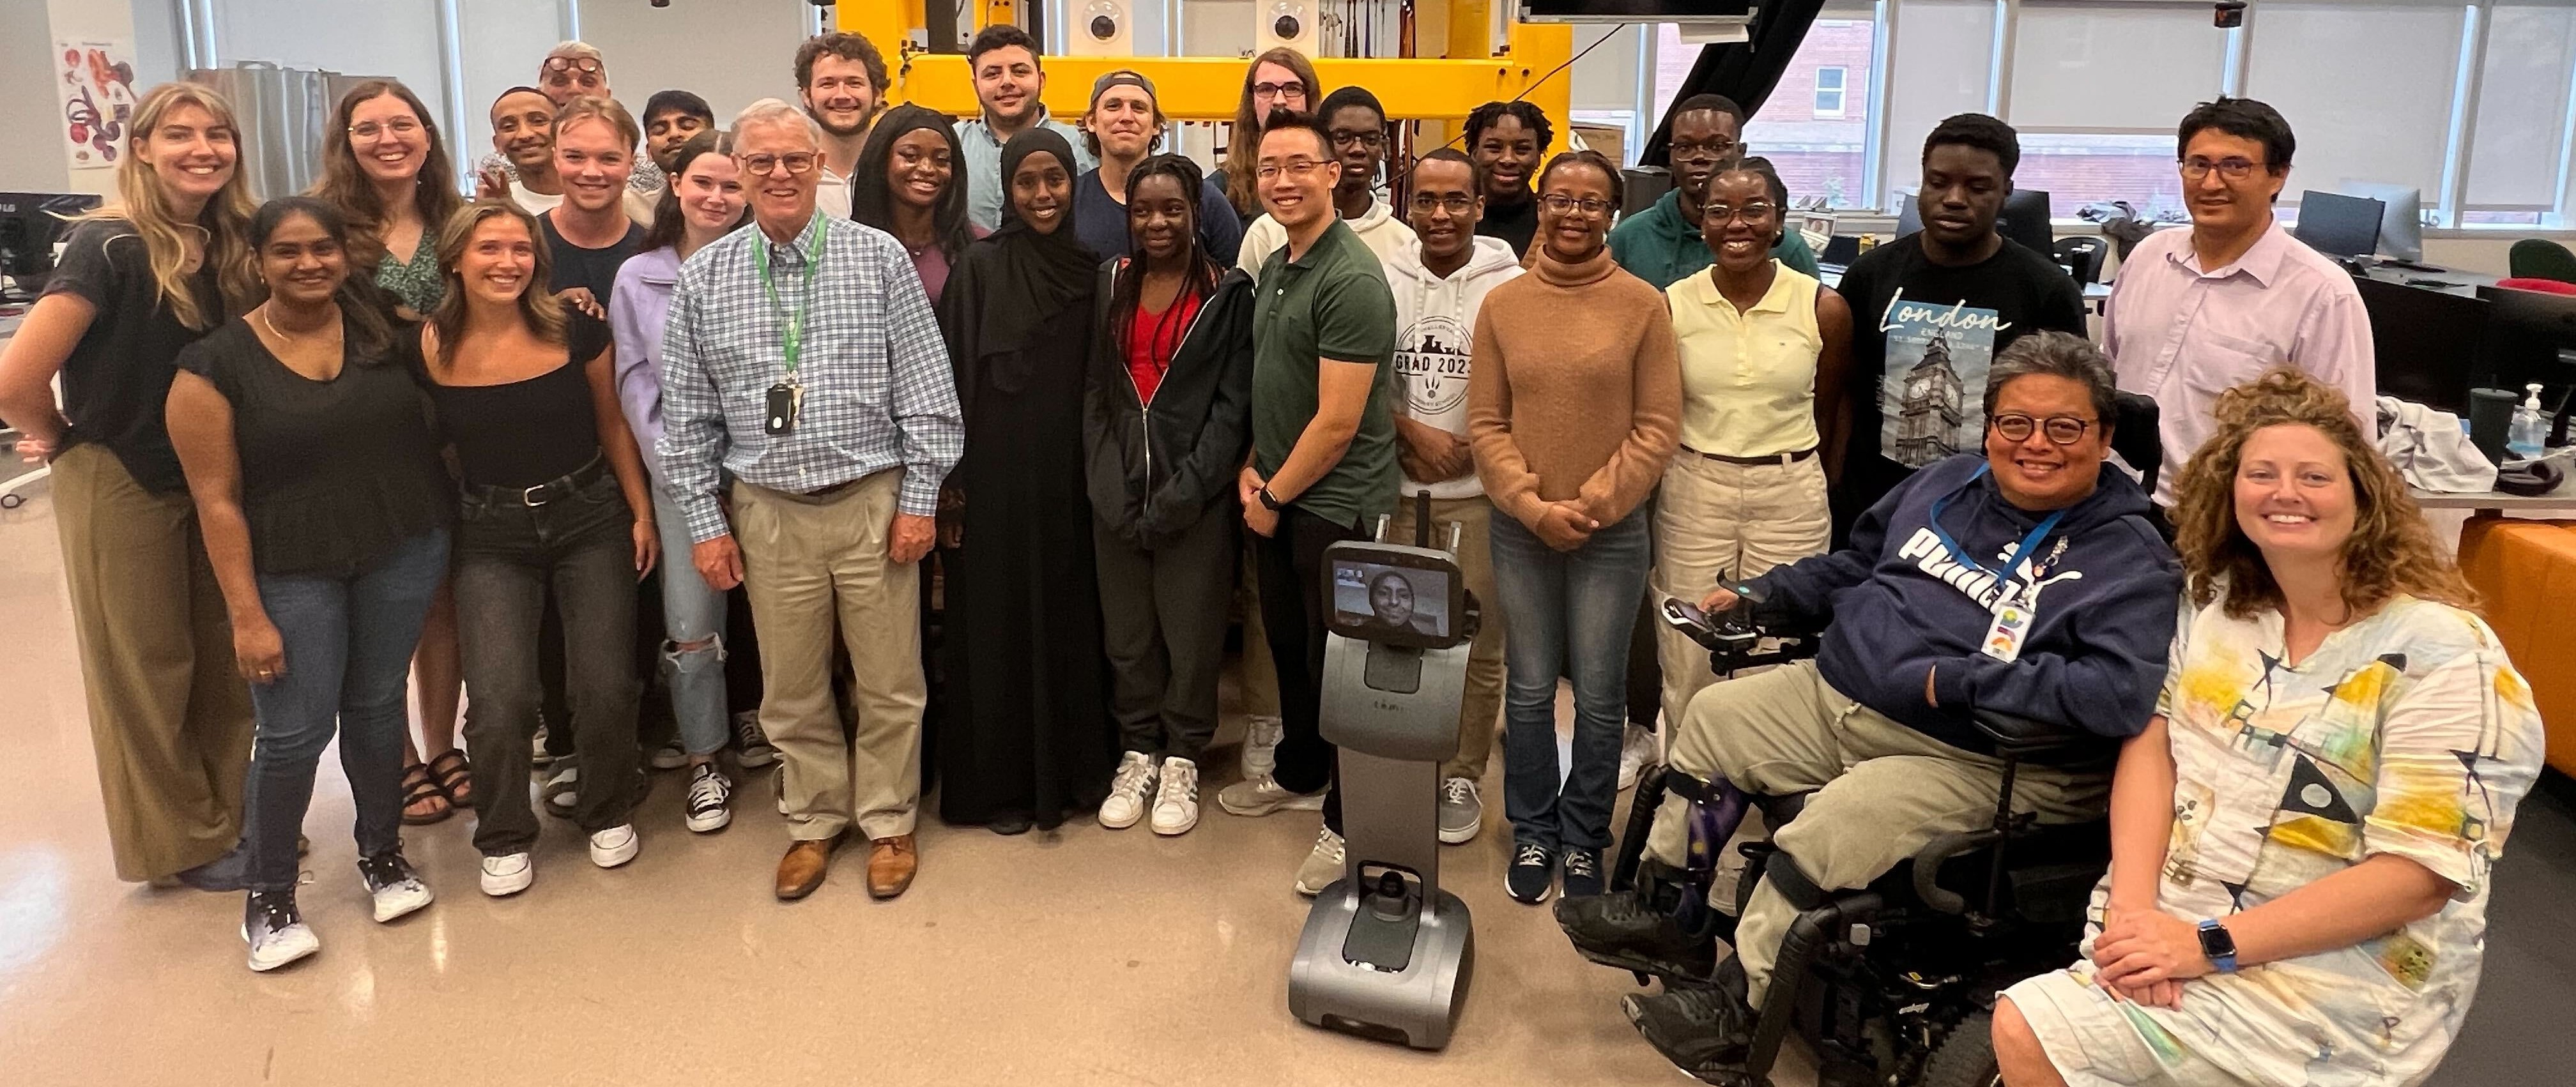 A wide photo showing the Rehab Robotics Lab's team from Summer 2023. There are 28 people and one person on a telepresence robot, smiling and in general chaotic disarray. You can tell a professional did not pose them.